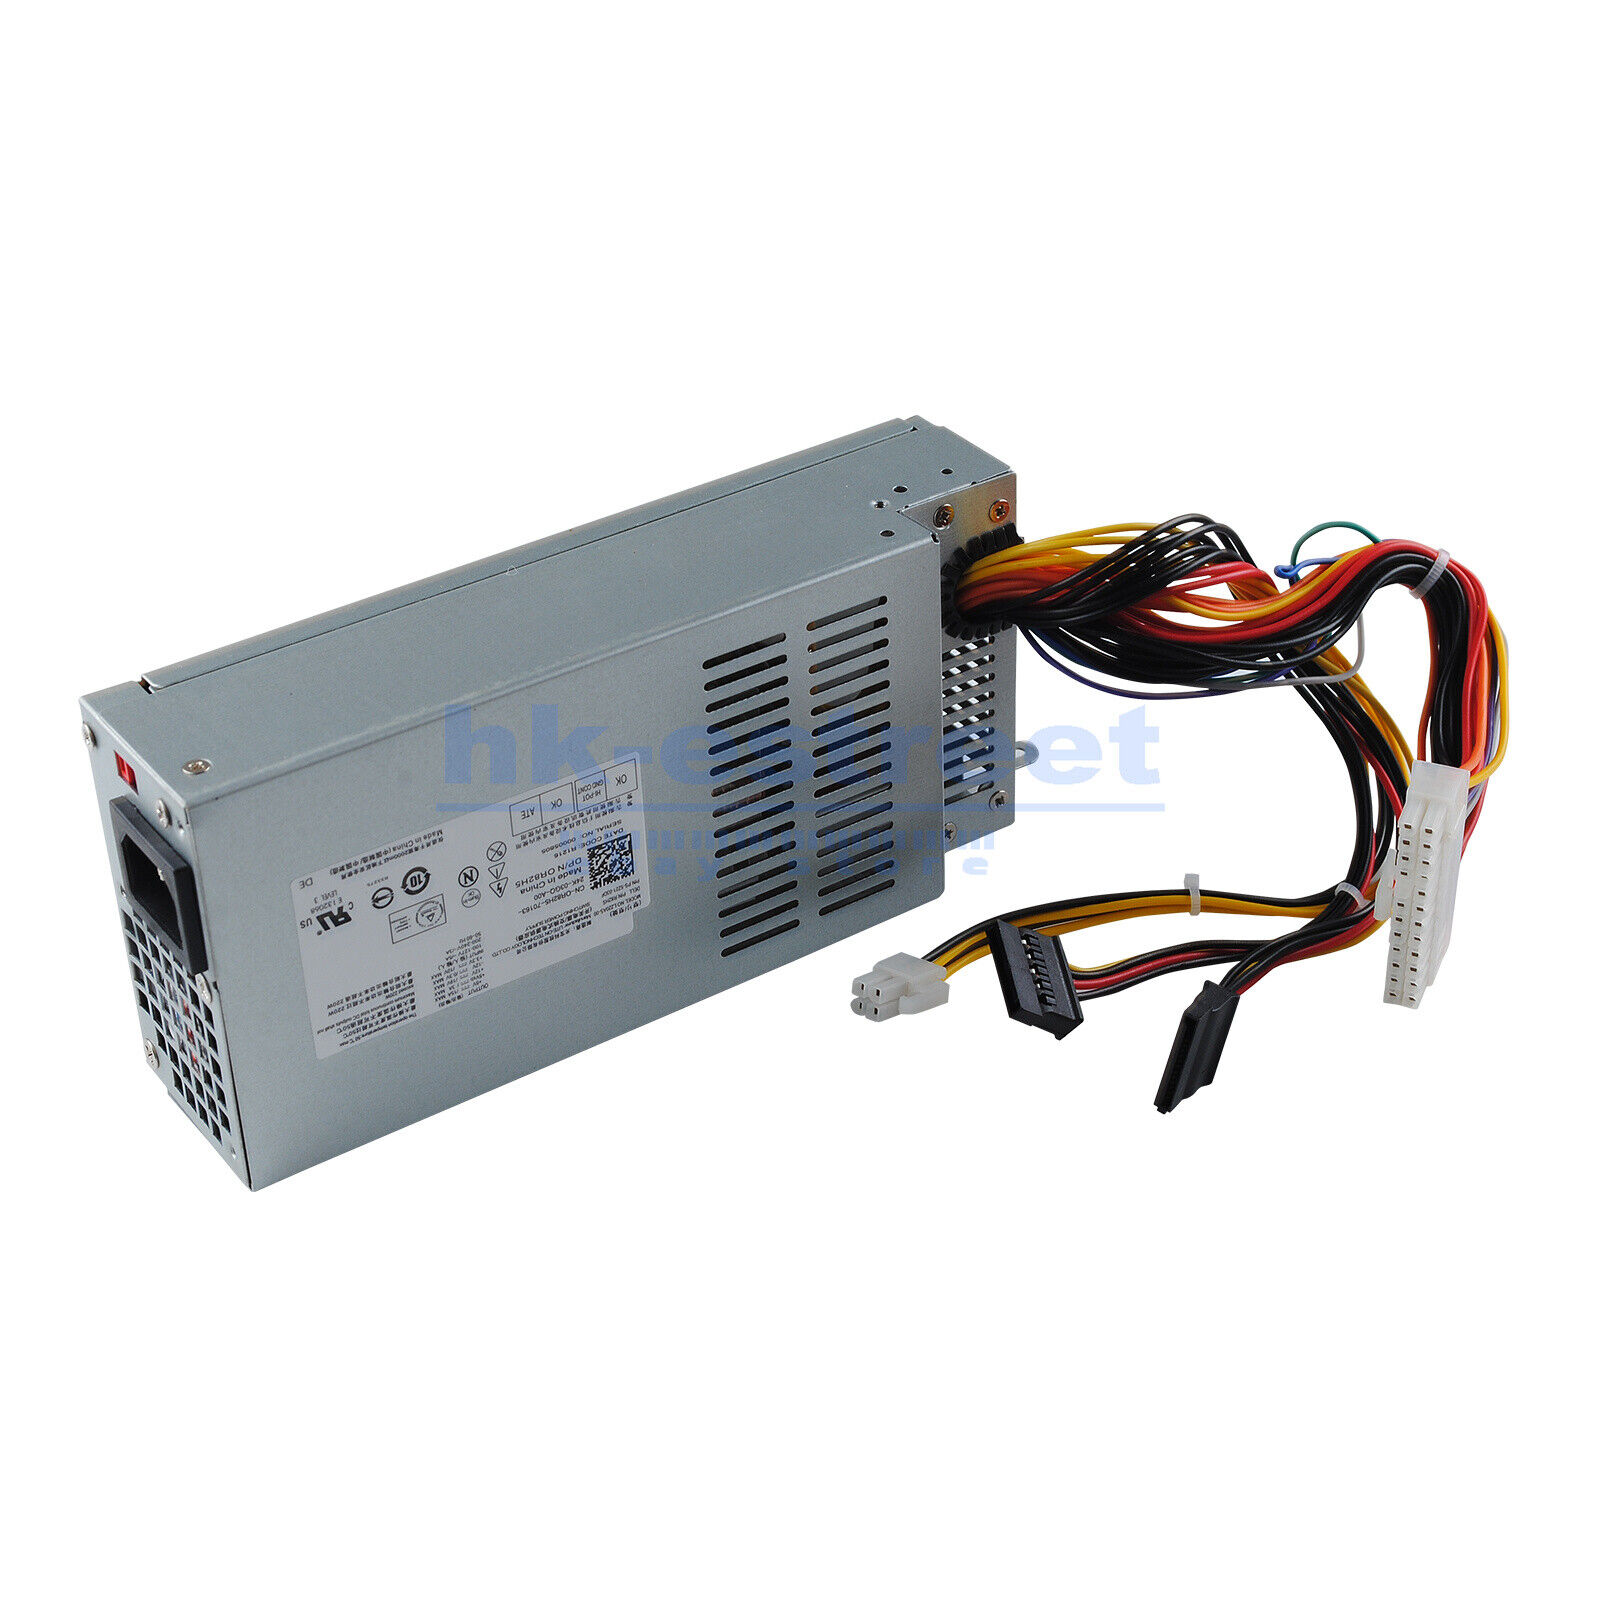 1X PSU POWER SUPPLY 220W FOR LITEON PS-5221-06 CPB09-D220R PS-5221-9 DPS-220UB-A